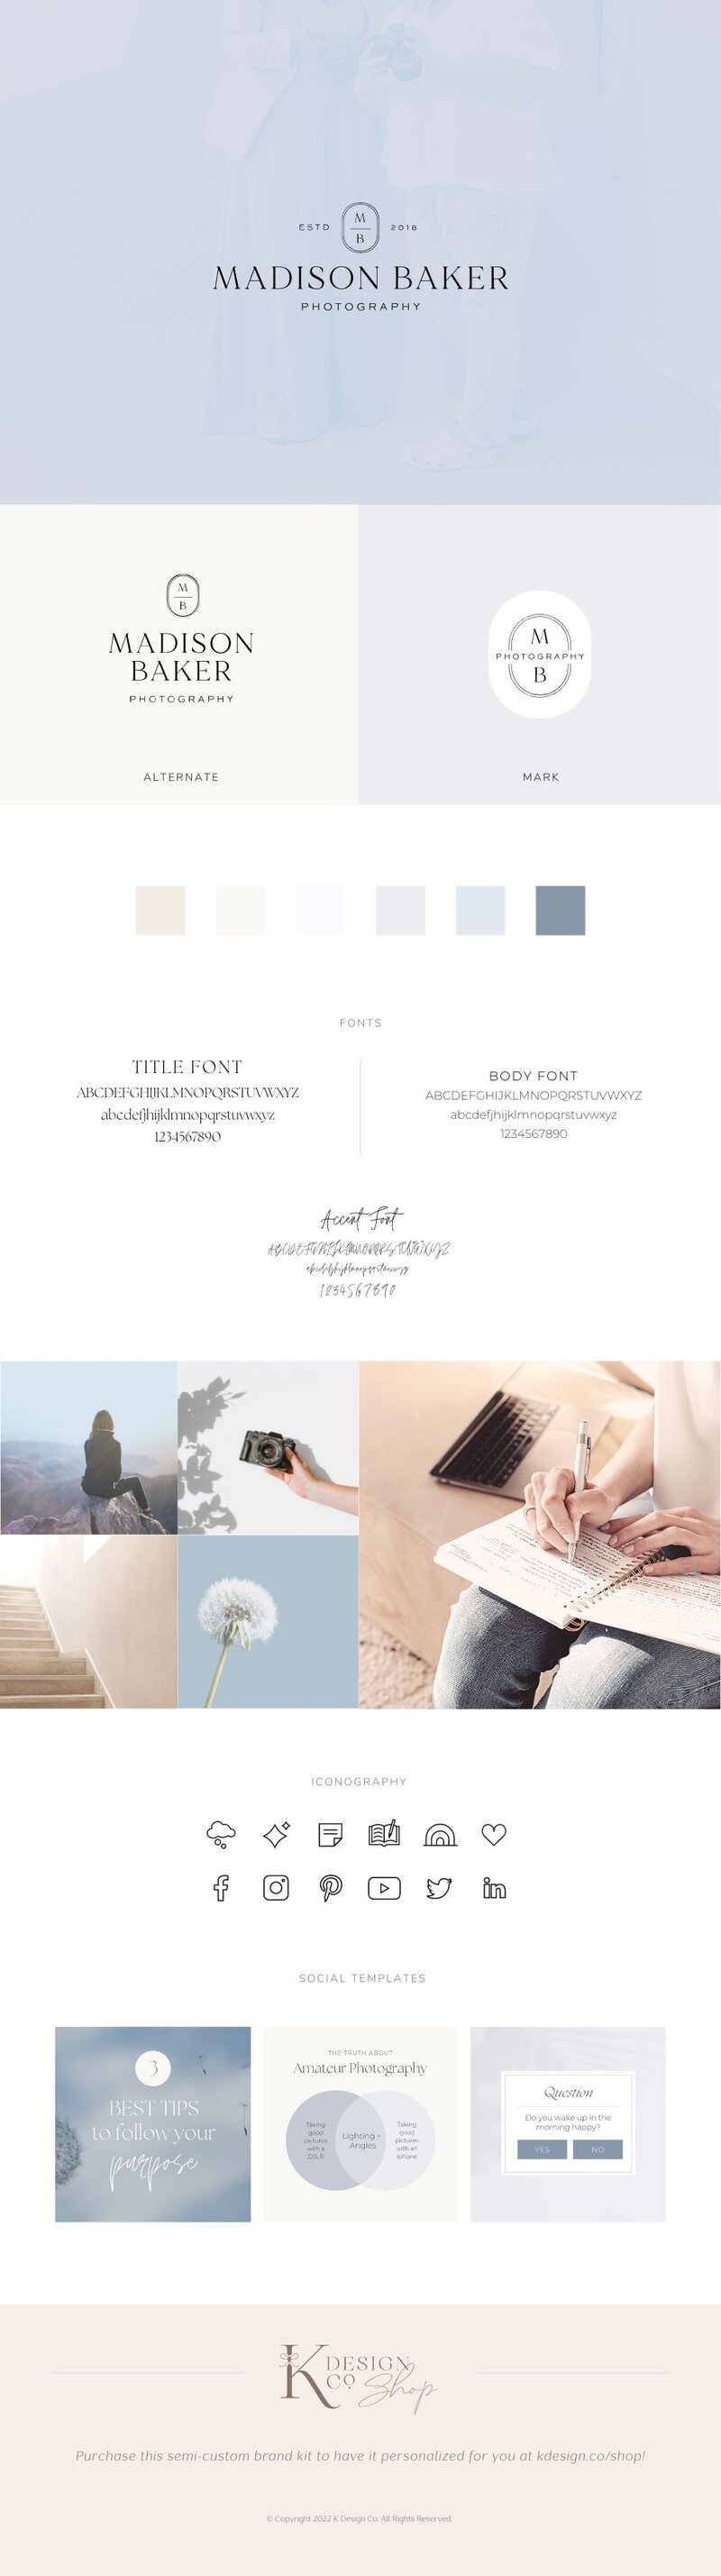 Photographer logo design and brand kit with moodboard, social media templates, icons, color palette, font suggestions and inspirational images